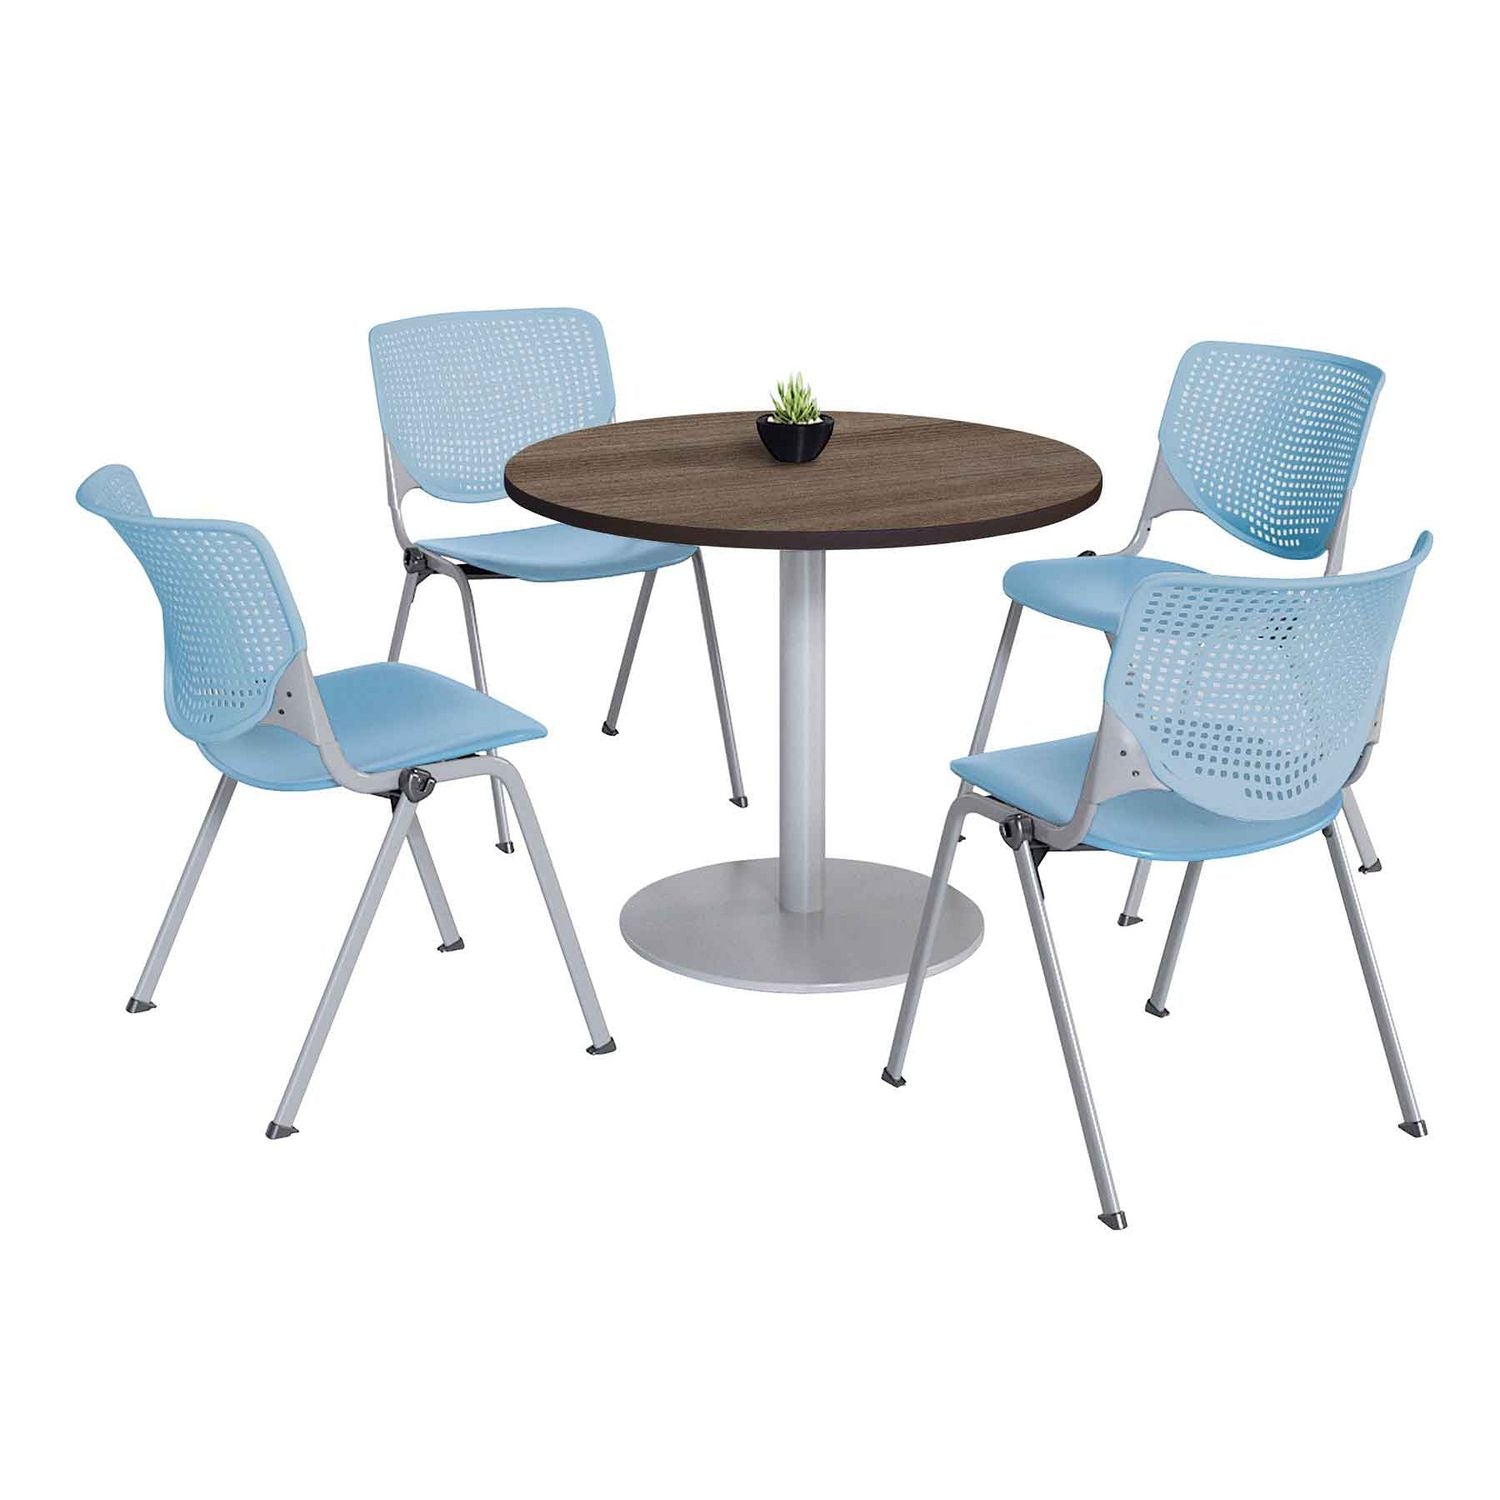 pedestal-table-with-four-sky-blue-kool-series-chairs-round-36-dia-x-29h-studio-teak-ships-in-4-6-business-days_kfi811774036900 - 1